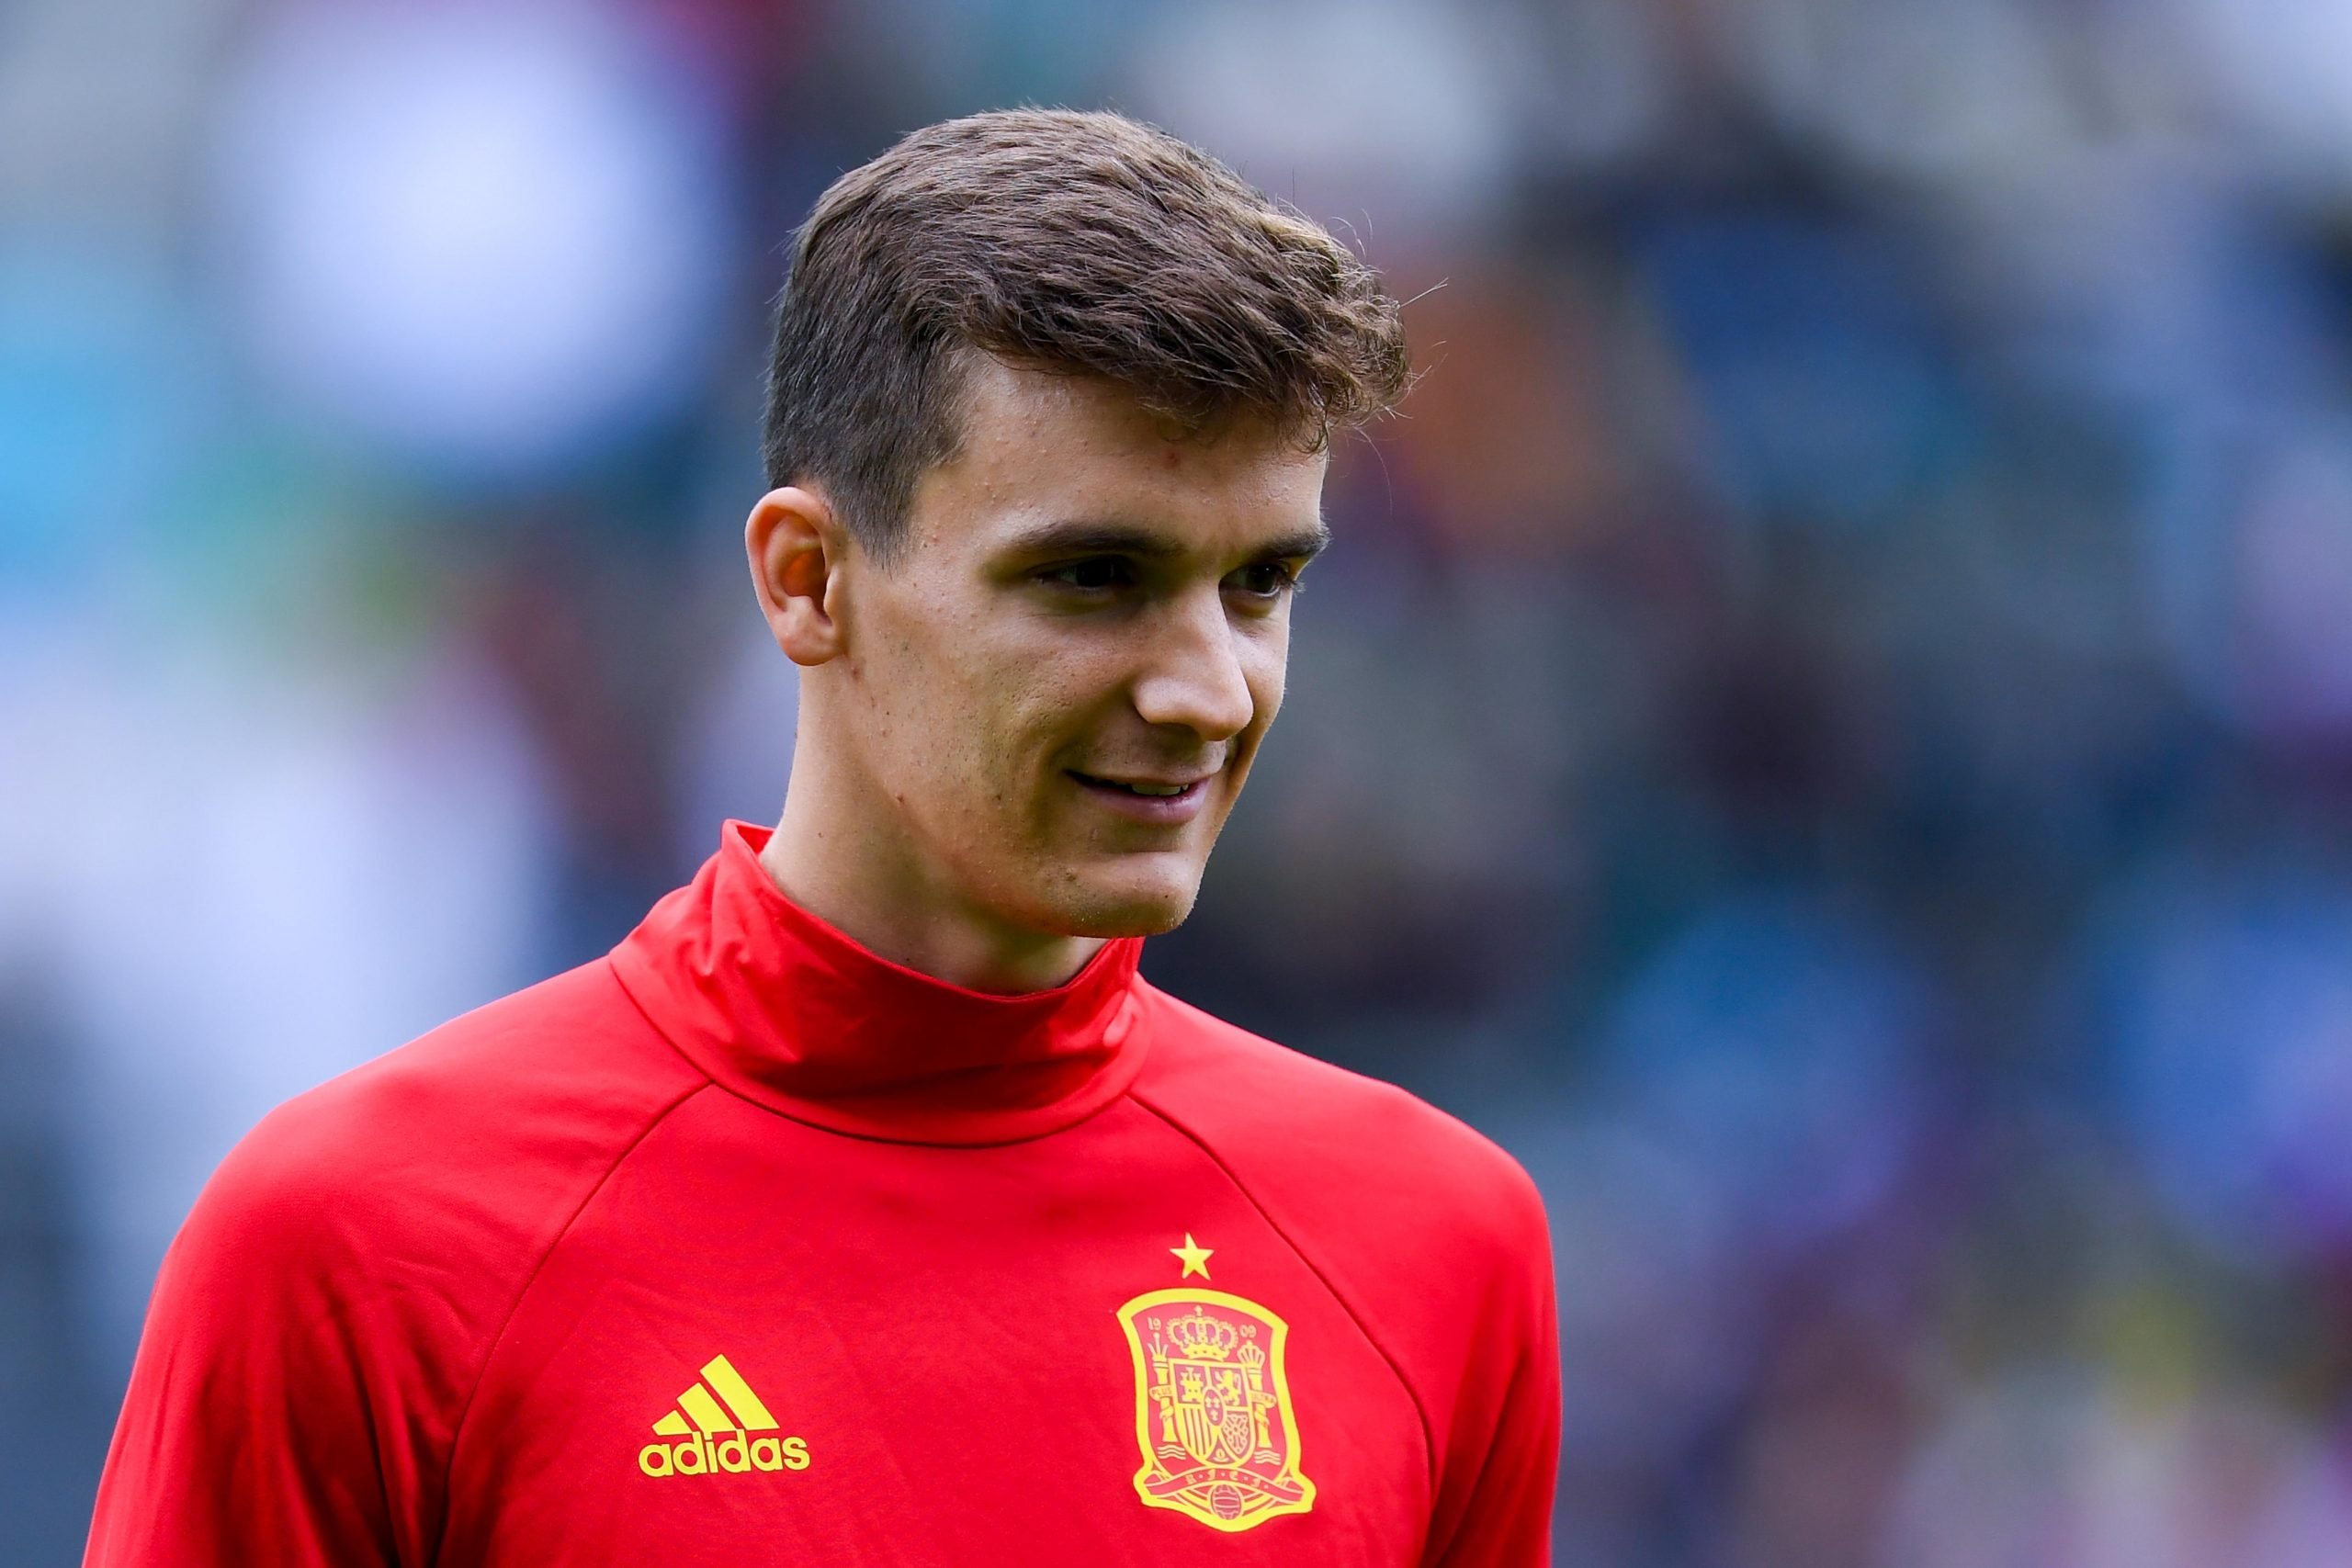 Leeds United have announced the arrival of Diego Llorente - A top signing for Leeds?